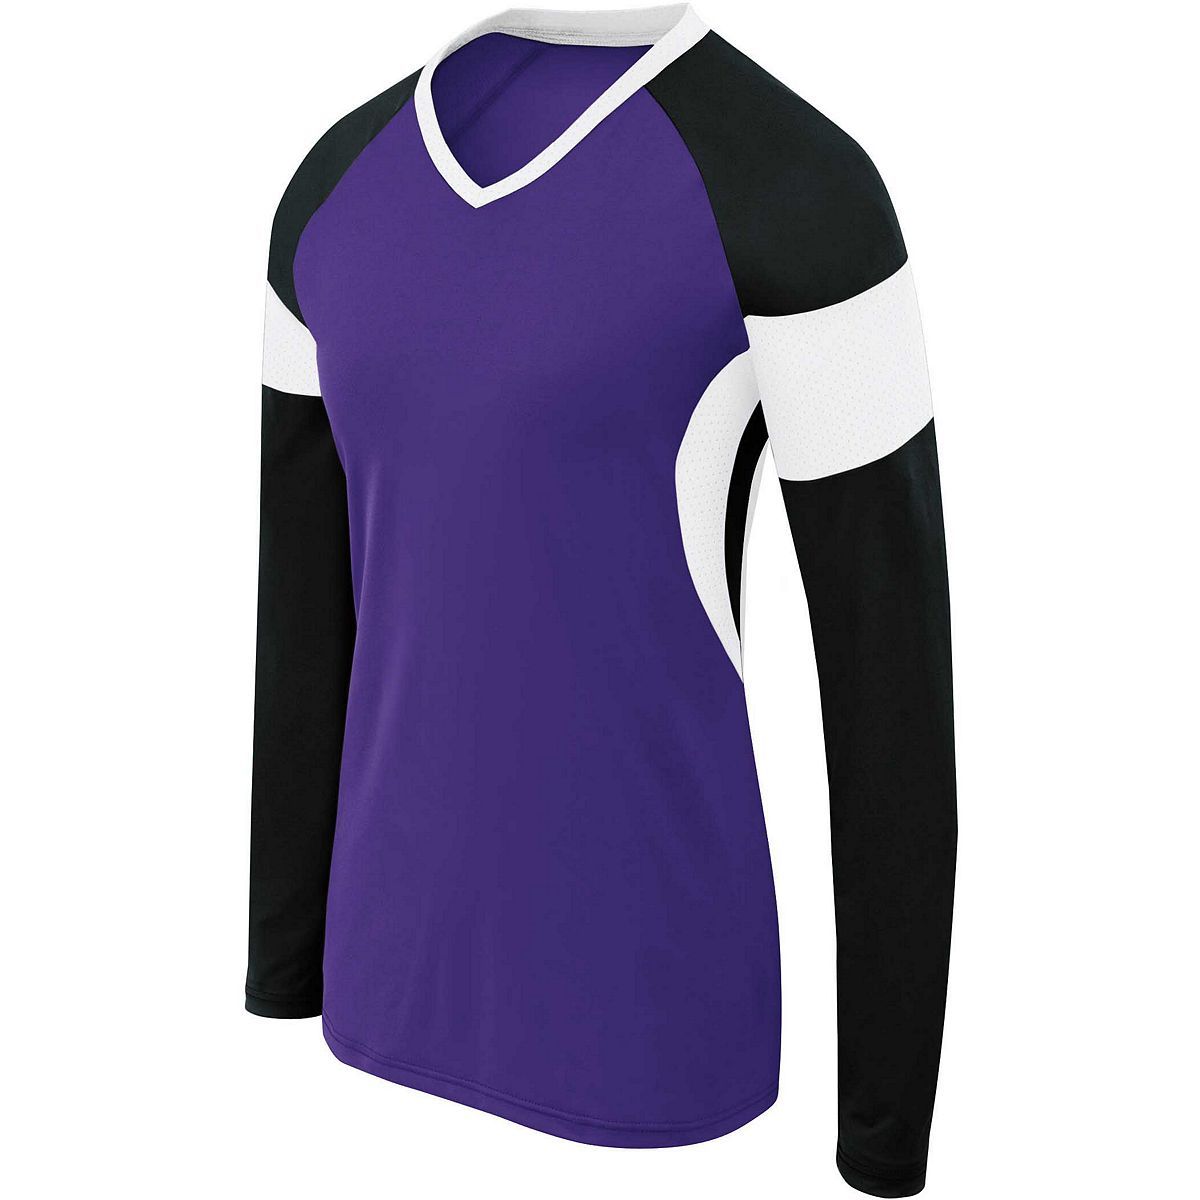 High 5 Girls Long Sleeve Raptor Jersey in Purple/Black/White  -Part of the Girls, High5-Products, Volleyball, Girls-Jersey, Shirts product lines at KanaleyCreations.com